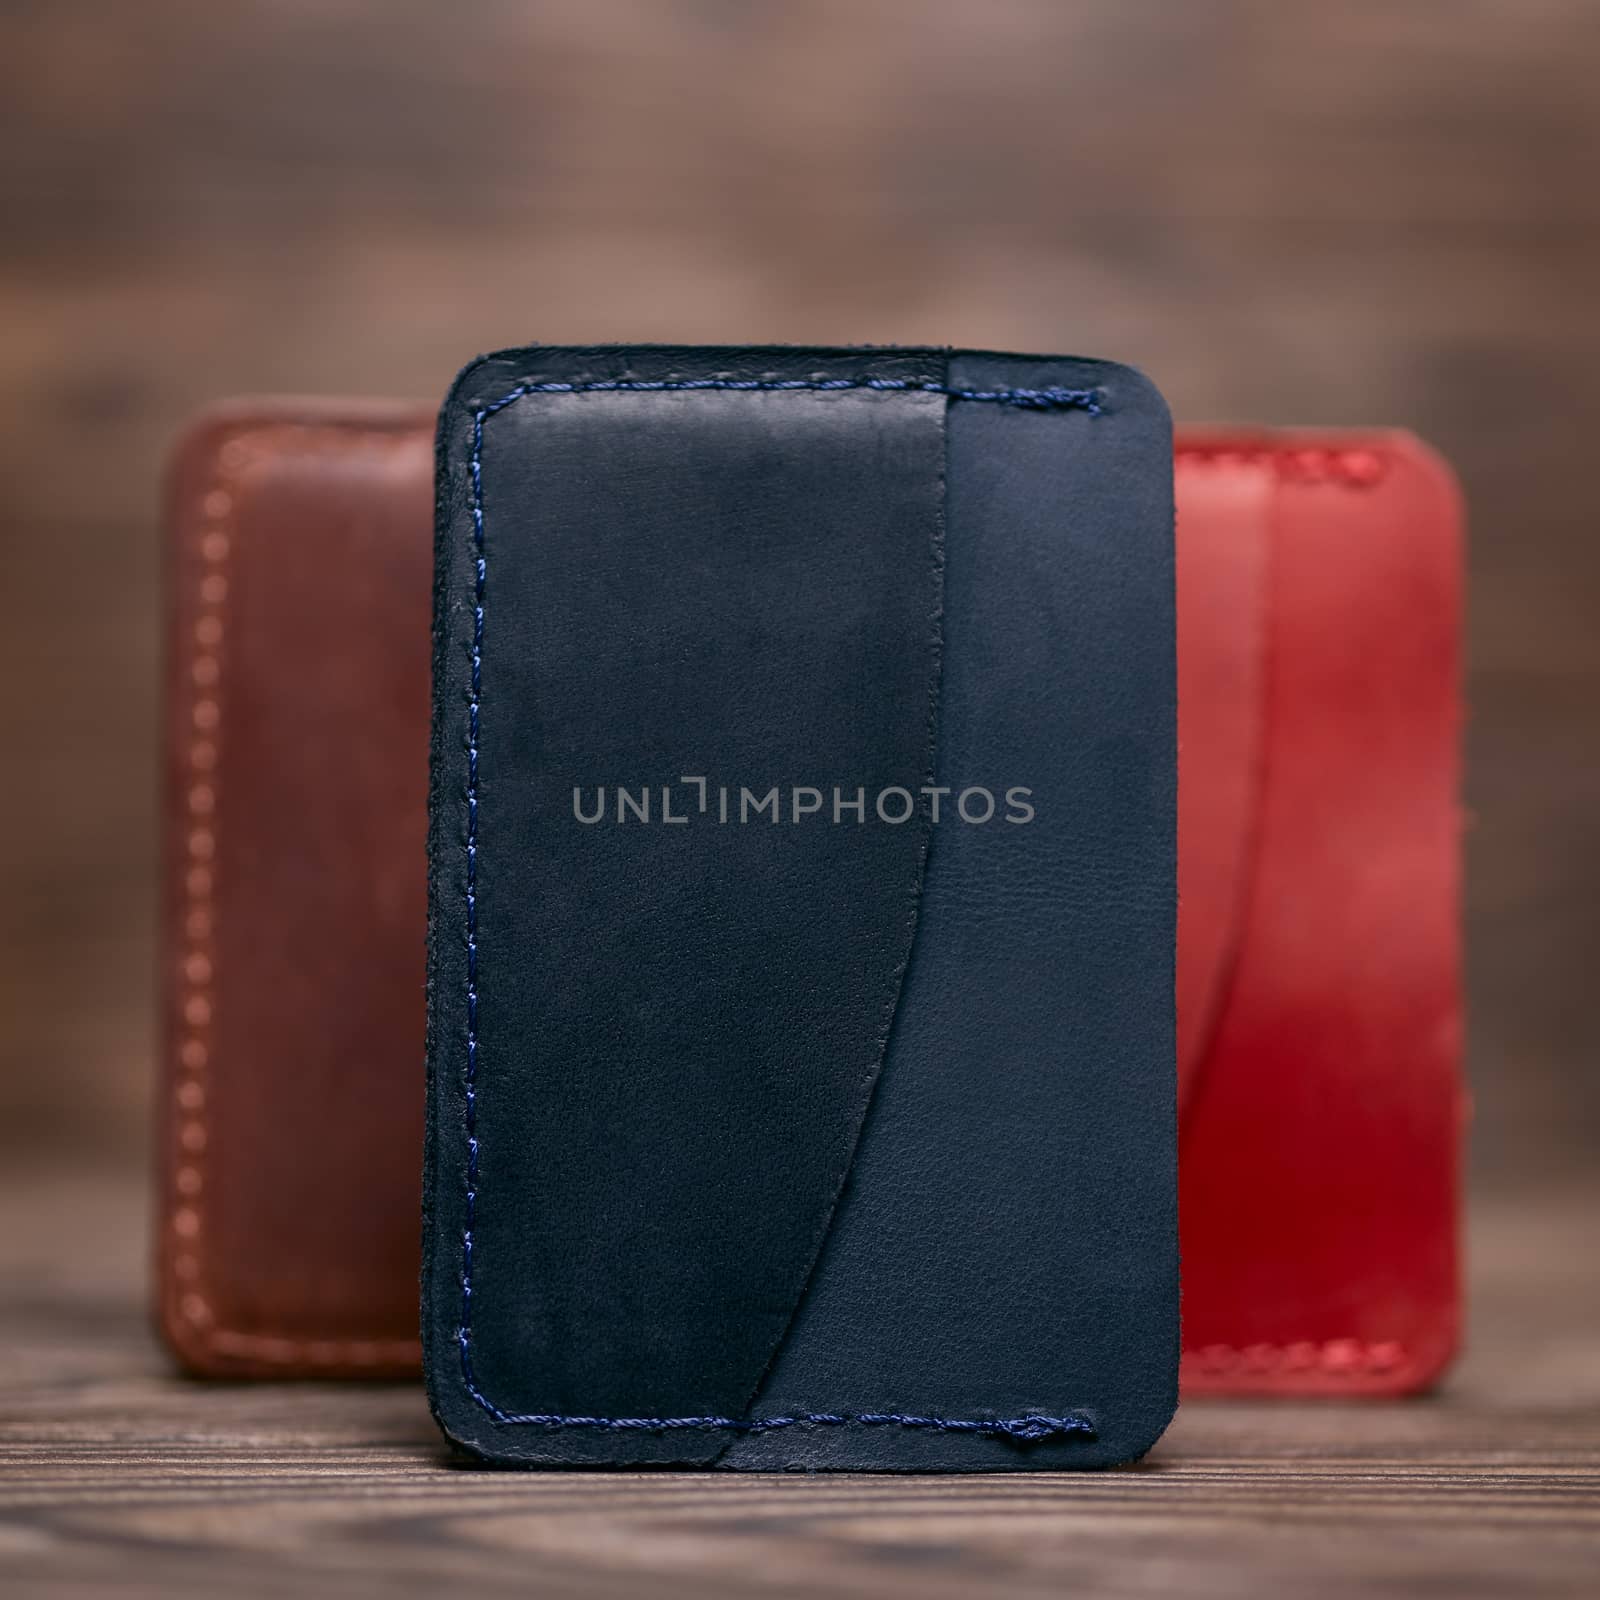 One pocket blue leather handmade cardholder. On blurred background stay other colour cardholders. Stock photo on blurred background.